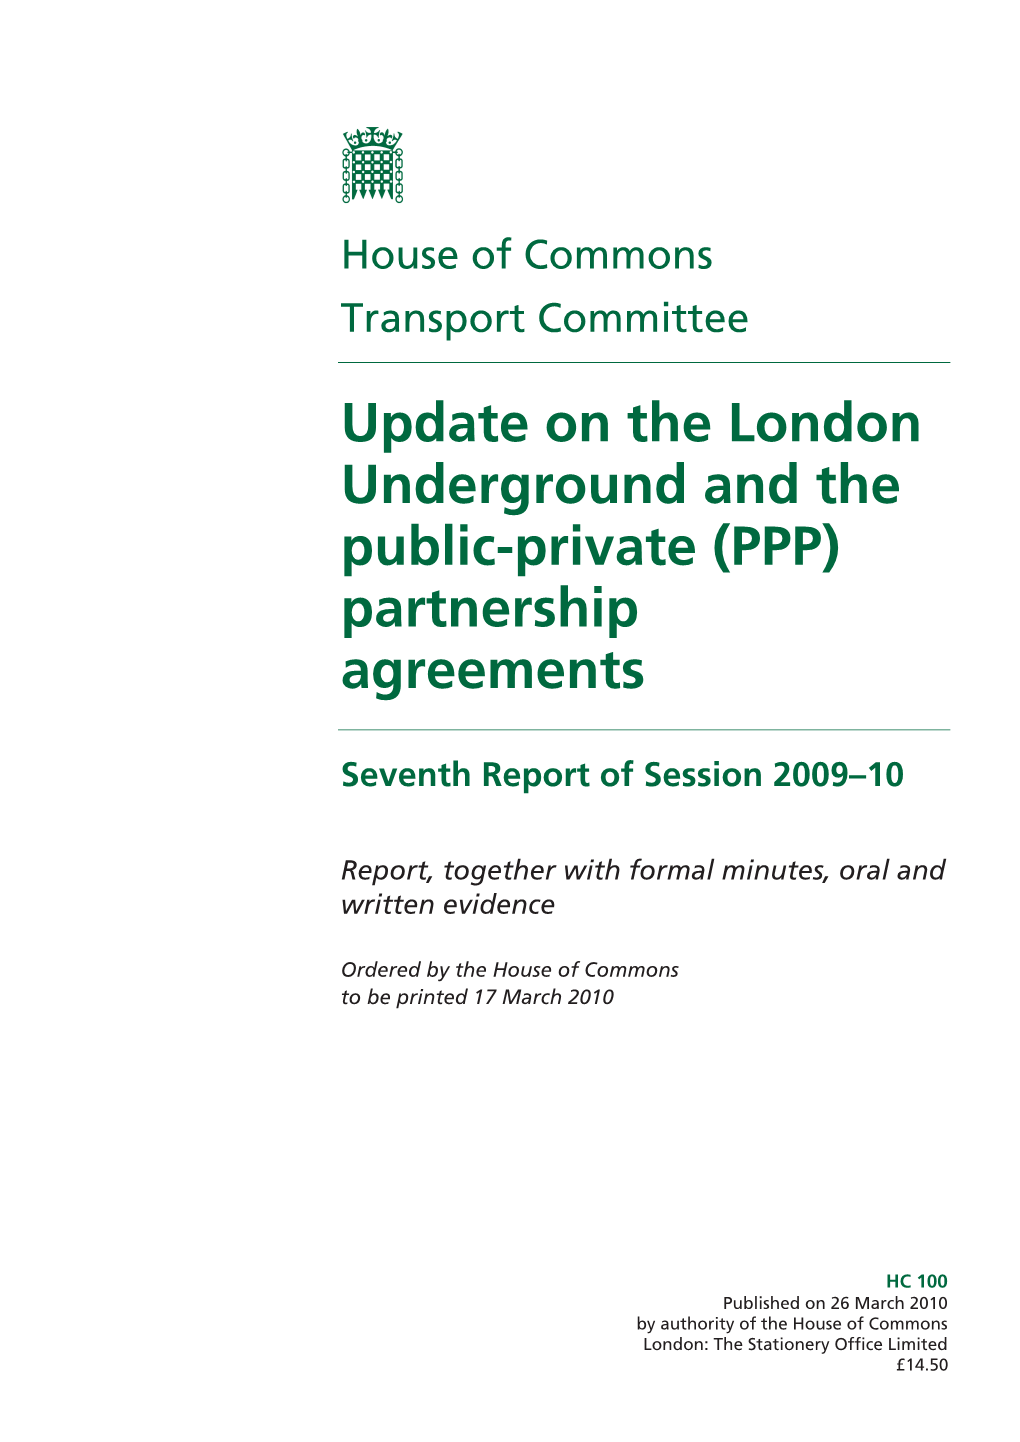 Update on the London Underground and the Public-Private (PPP) Partnership Agreements